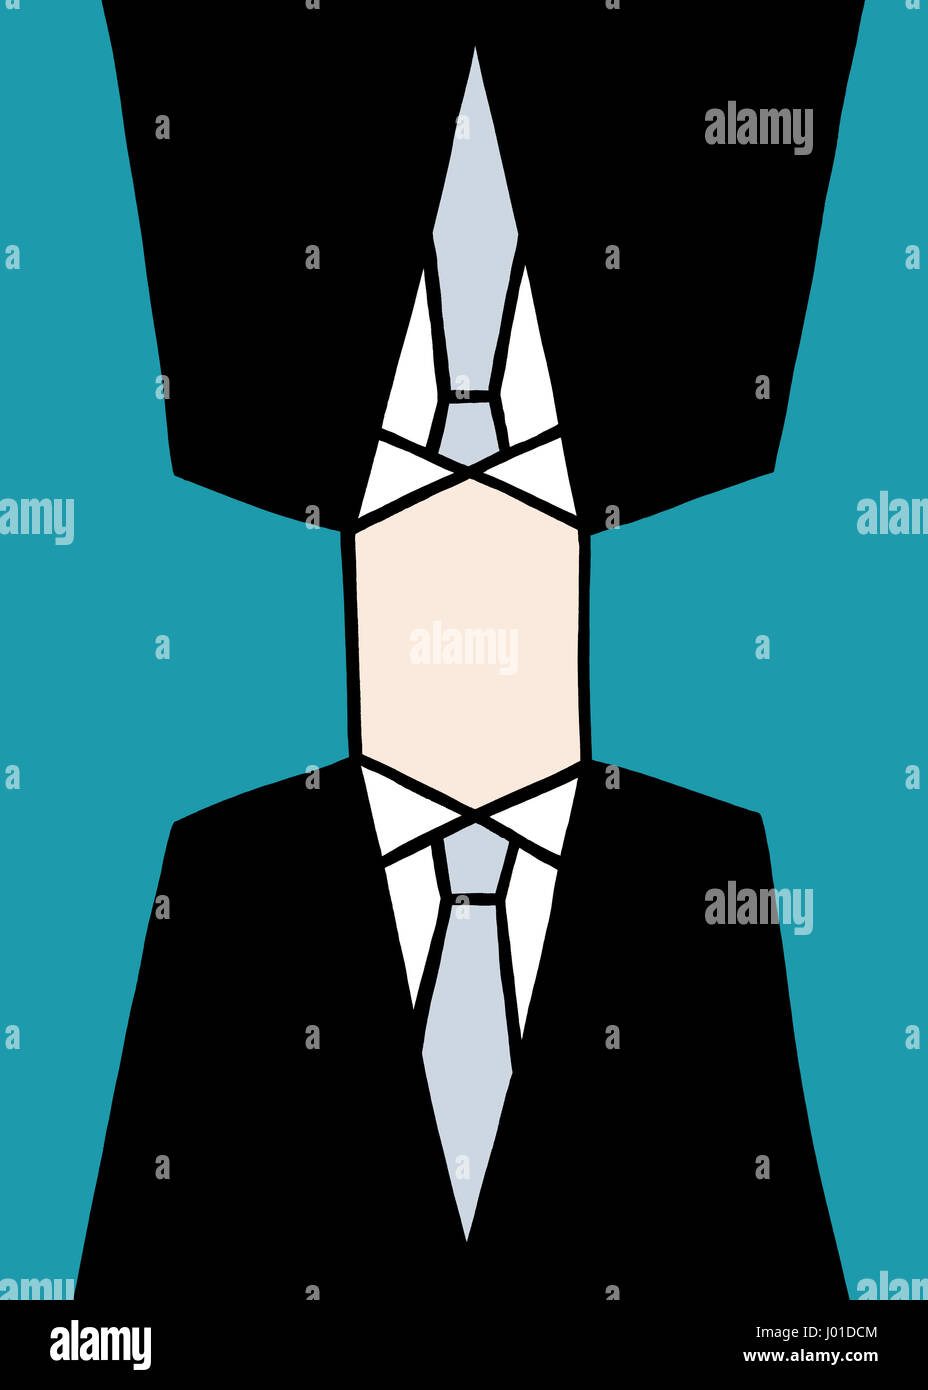 You and me are of one mind. A business illustration about thinking different thoughts. Stock Photo